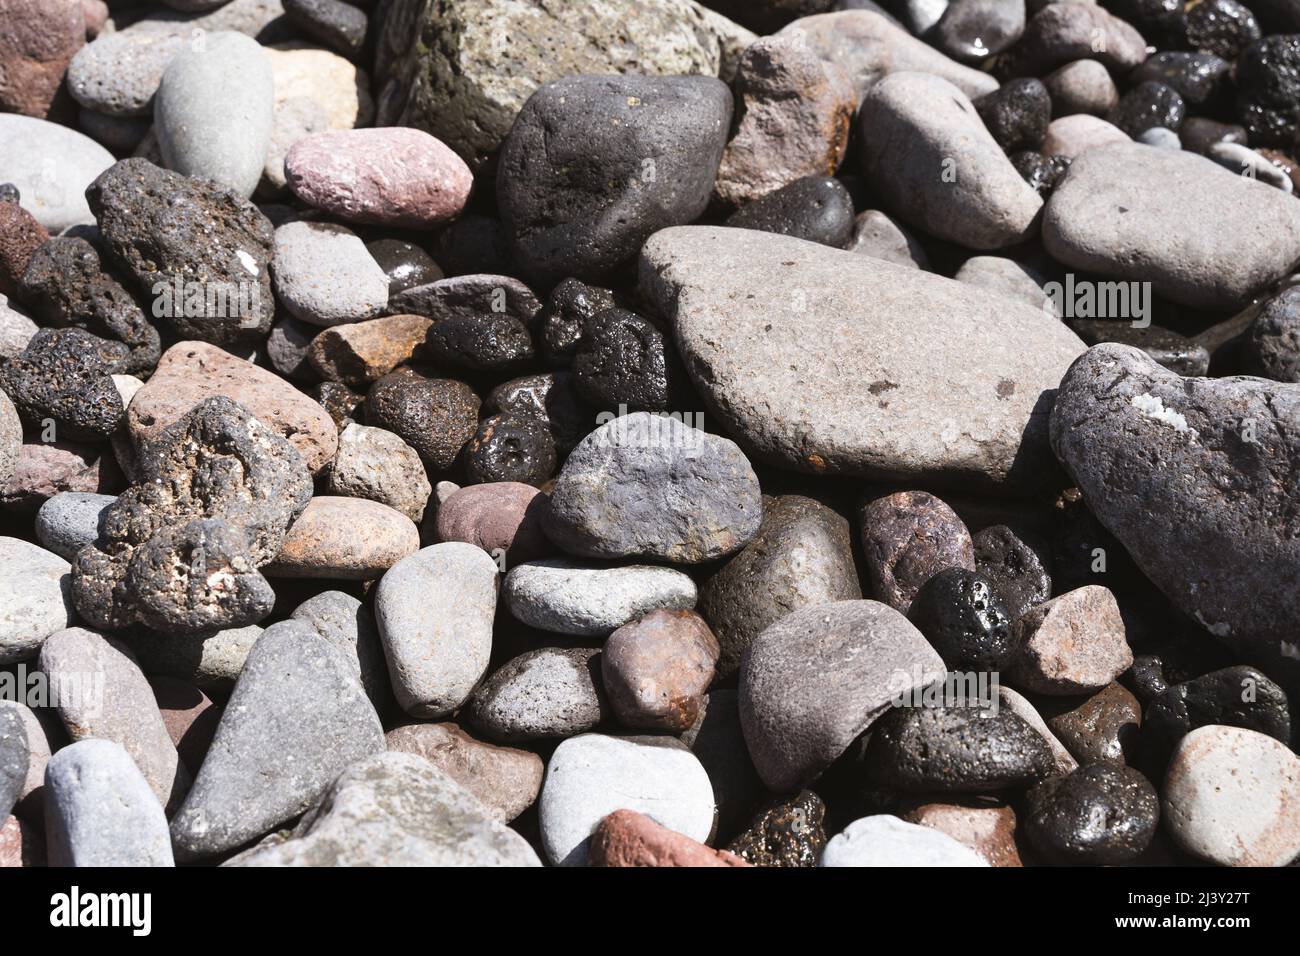 Wet and dry stones bathed by sunlight on the beach. Different shapes and sizes washed pebbles texture background Stock Photo